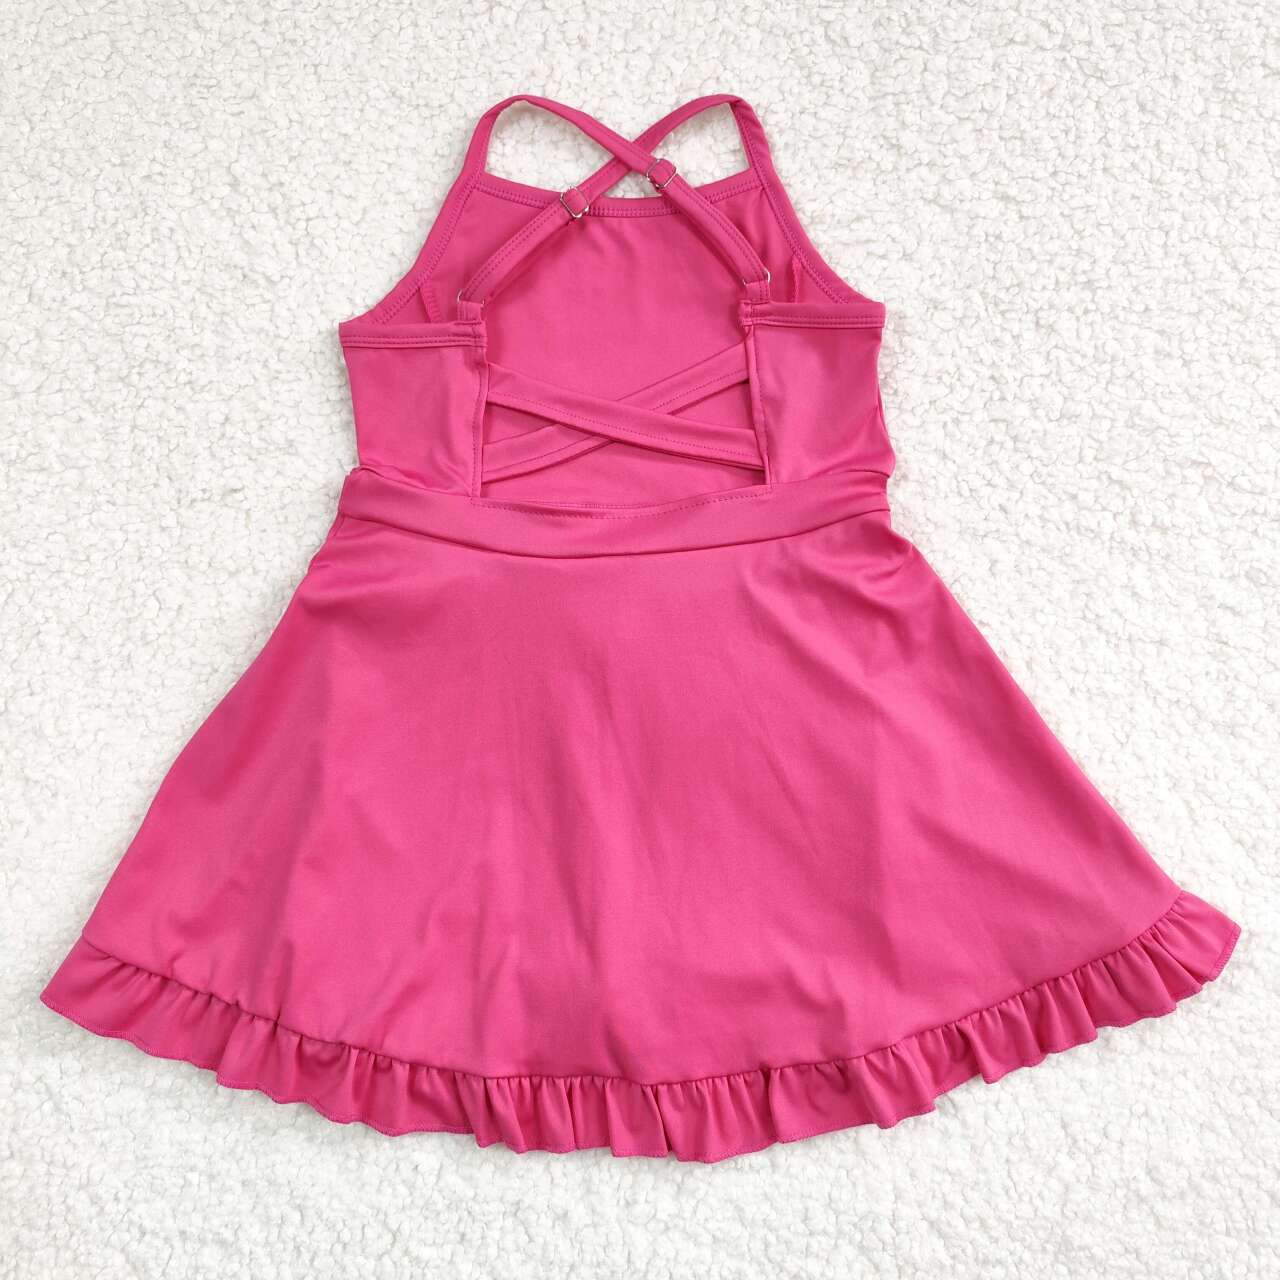 S0440 Hotpink Color Girls Knee Length Shorts Sports Dress 1 Pieces Swimsuits